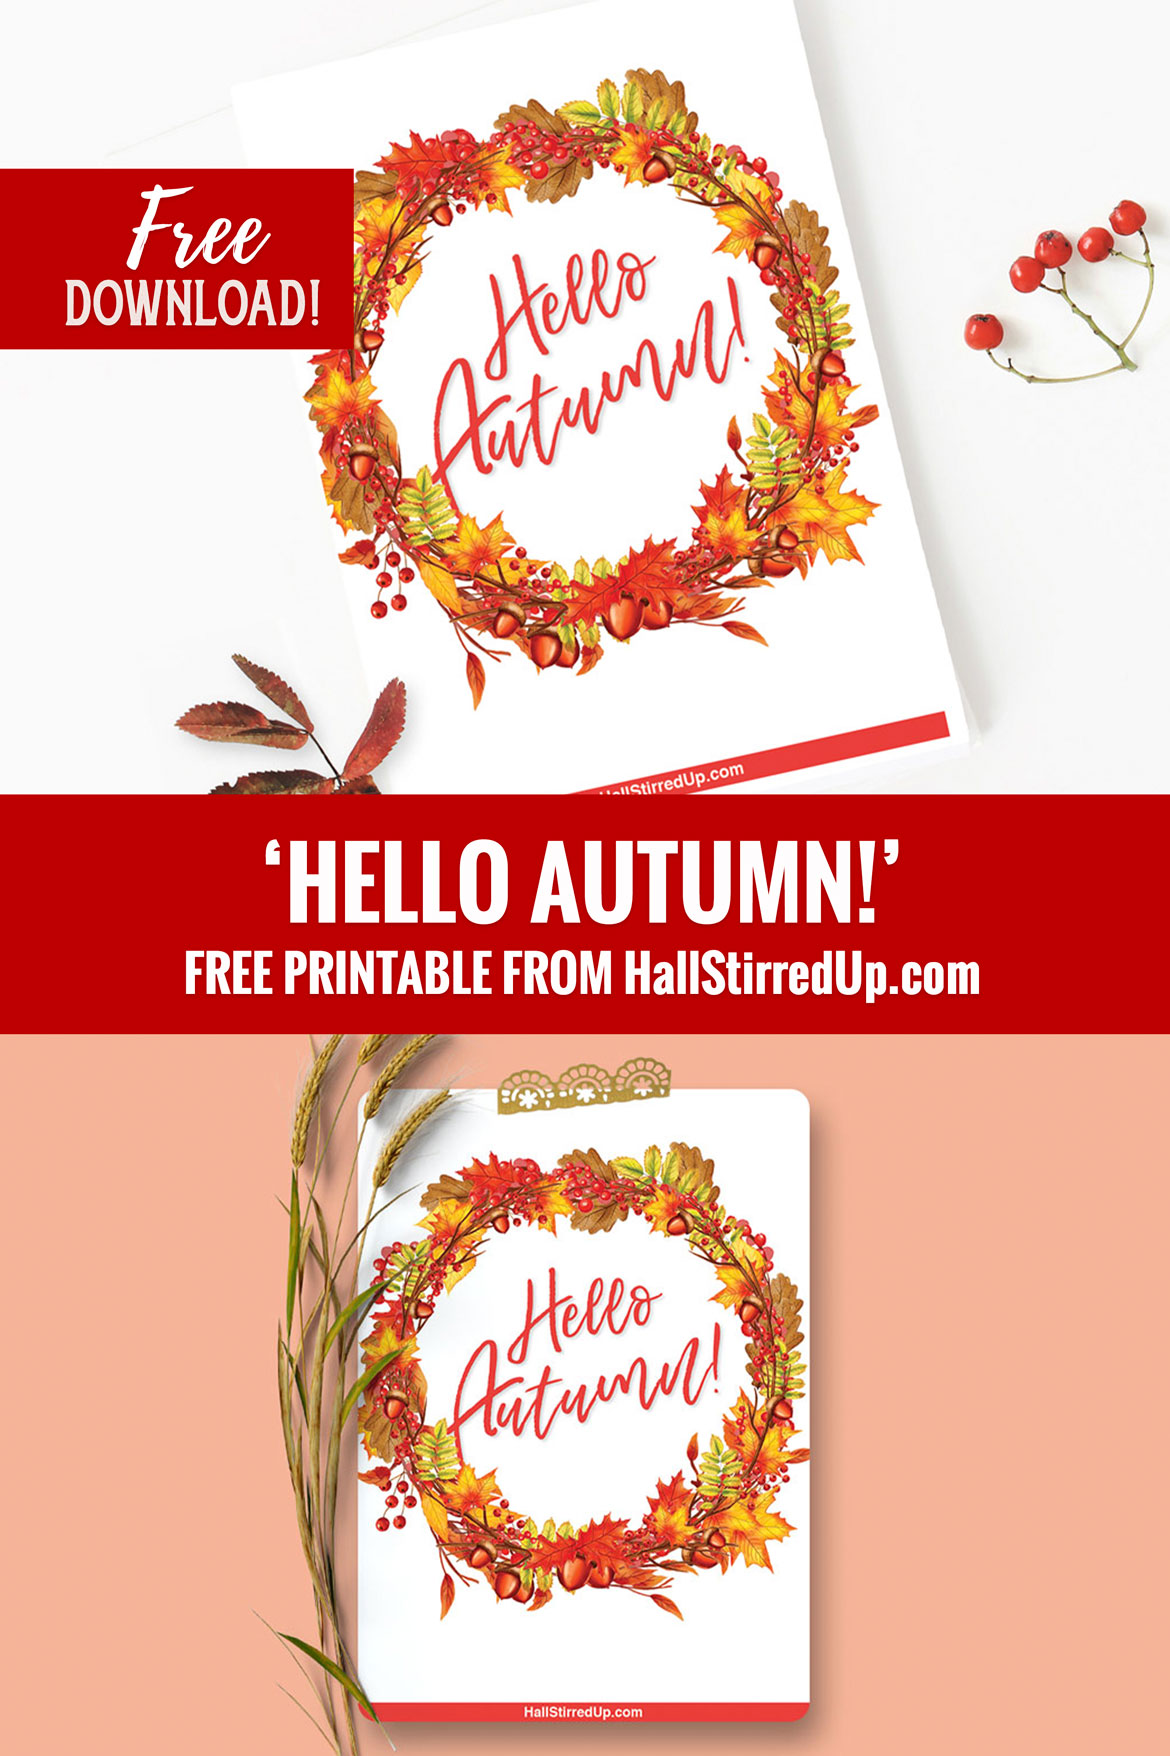 Top 10 best things about Autumn includes a free printable